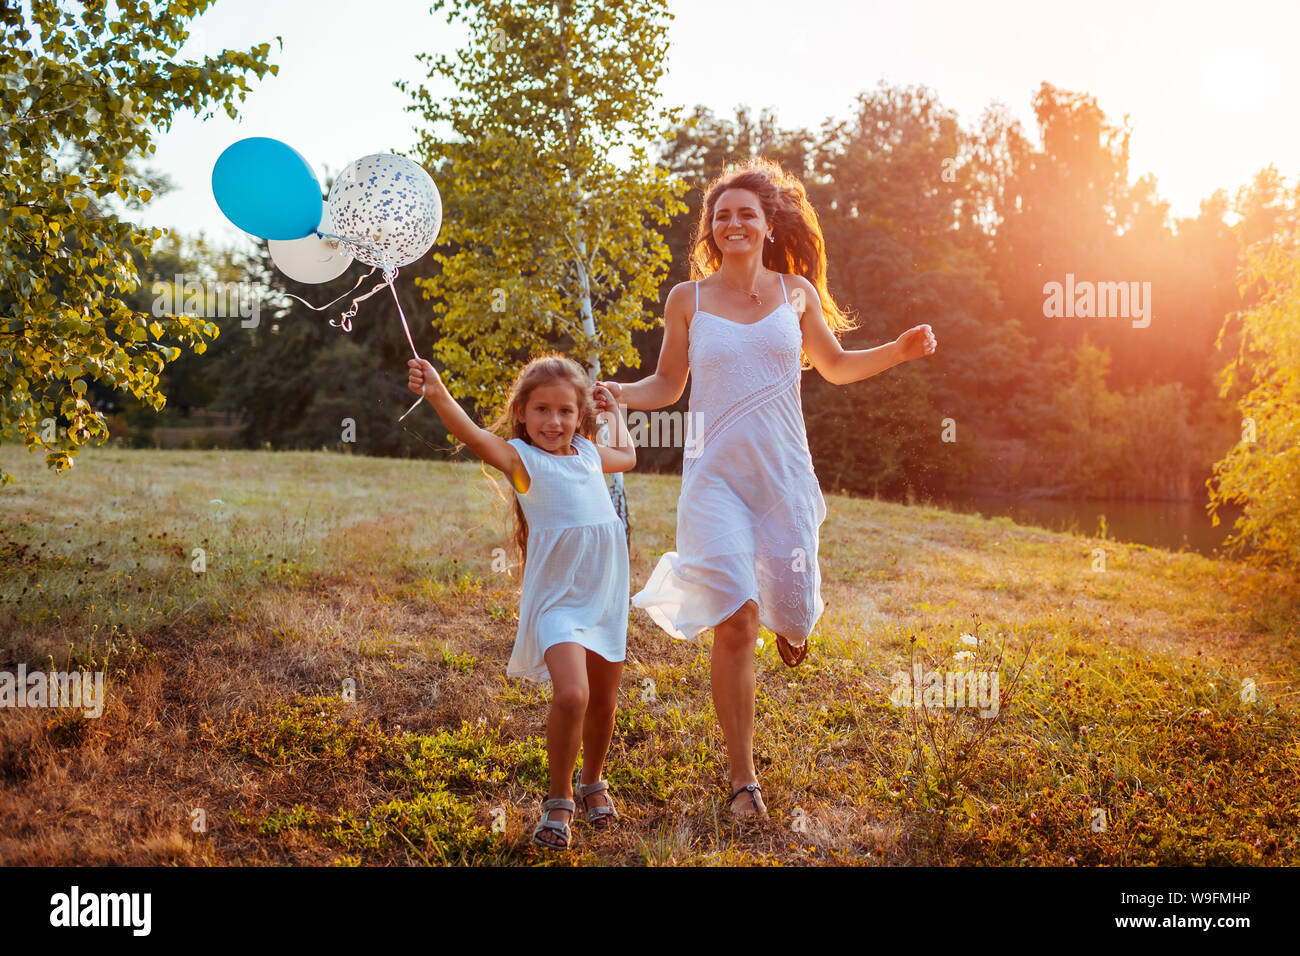 Happy little girl running with mother and holding baloons in hand. Family having fun in summer park at sunset. International Childrens Day Stock Photo